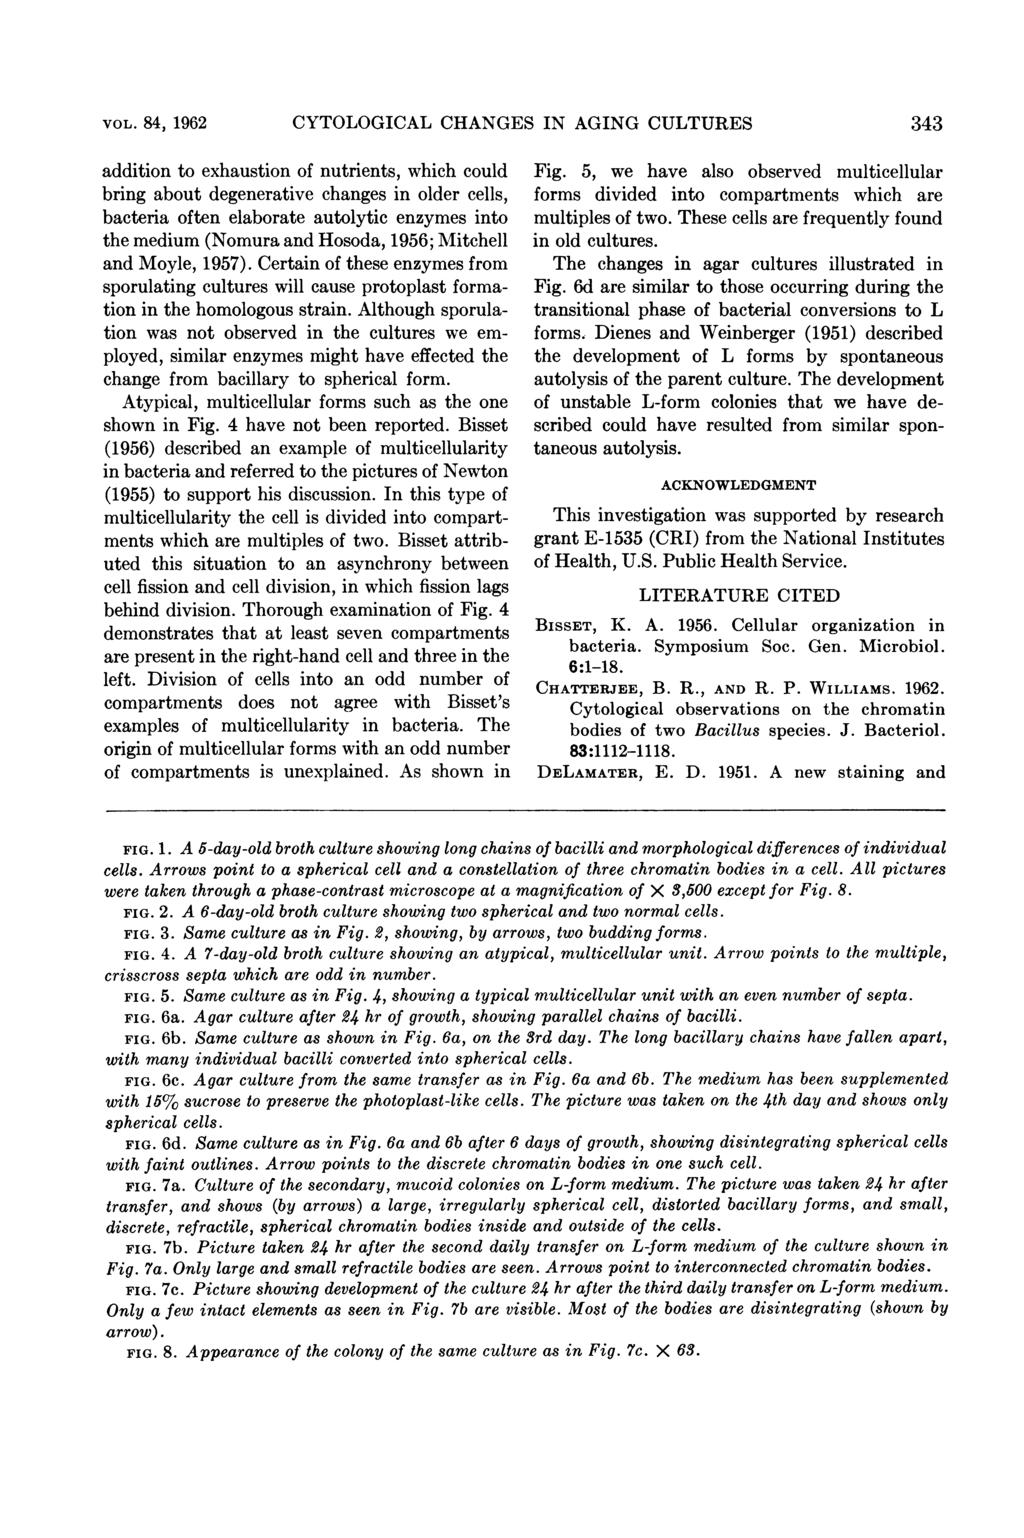 VOL. 84, 1962 CYTOLOGICAL CHANGES IN AGING CULTURES 343 addition to exhaustion of nutrients, which could bring about degenerative changes in older cells, bacteria often elaborate autolytic enzymes